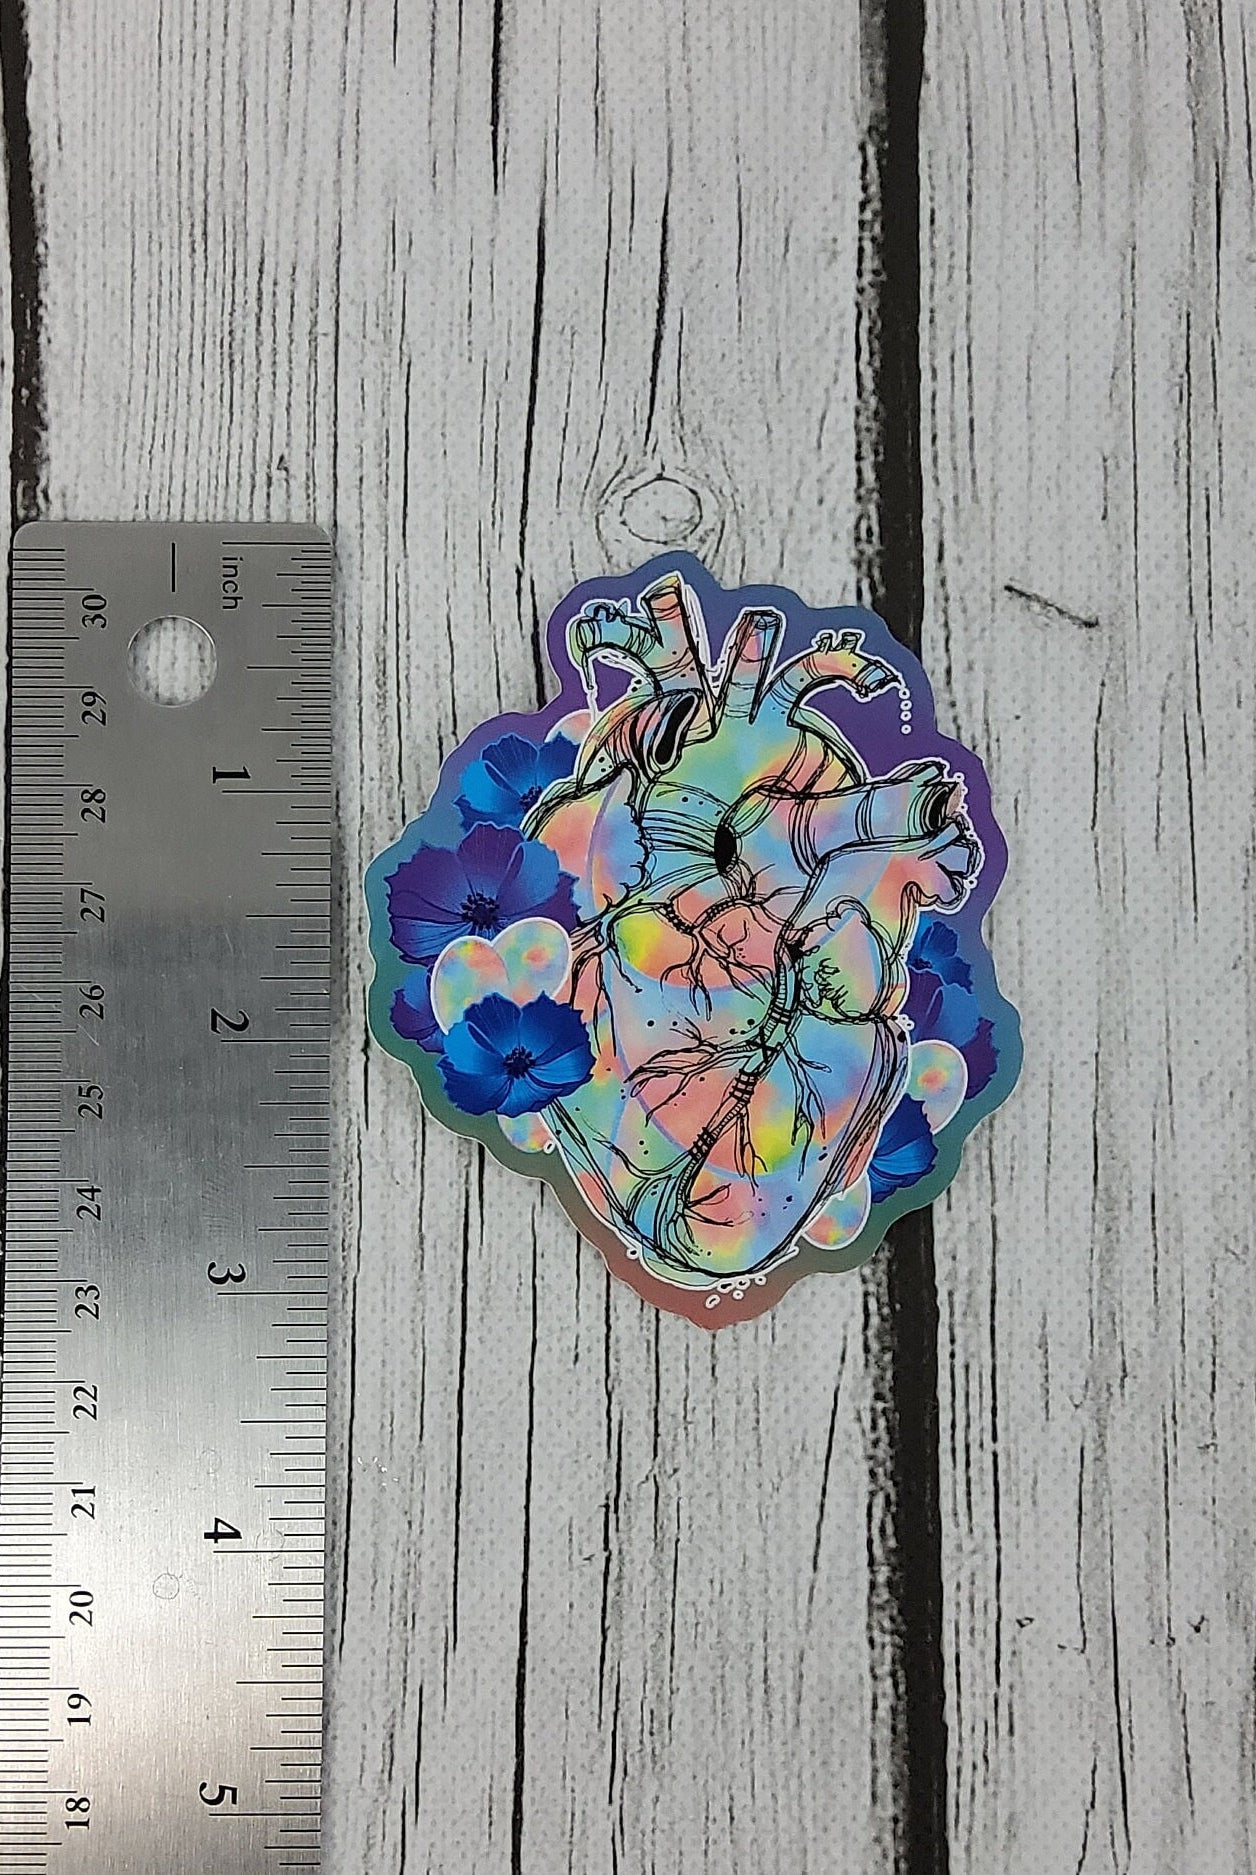 GLOSSY STICKER: October Opal Heart and Blue Cosmos Birthstone Crystal, Opal and Cosmos Crystal Sticker , Pastel Rainbow Crystal Sticker